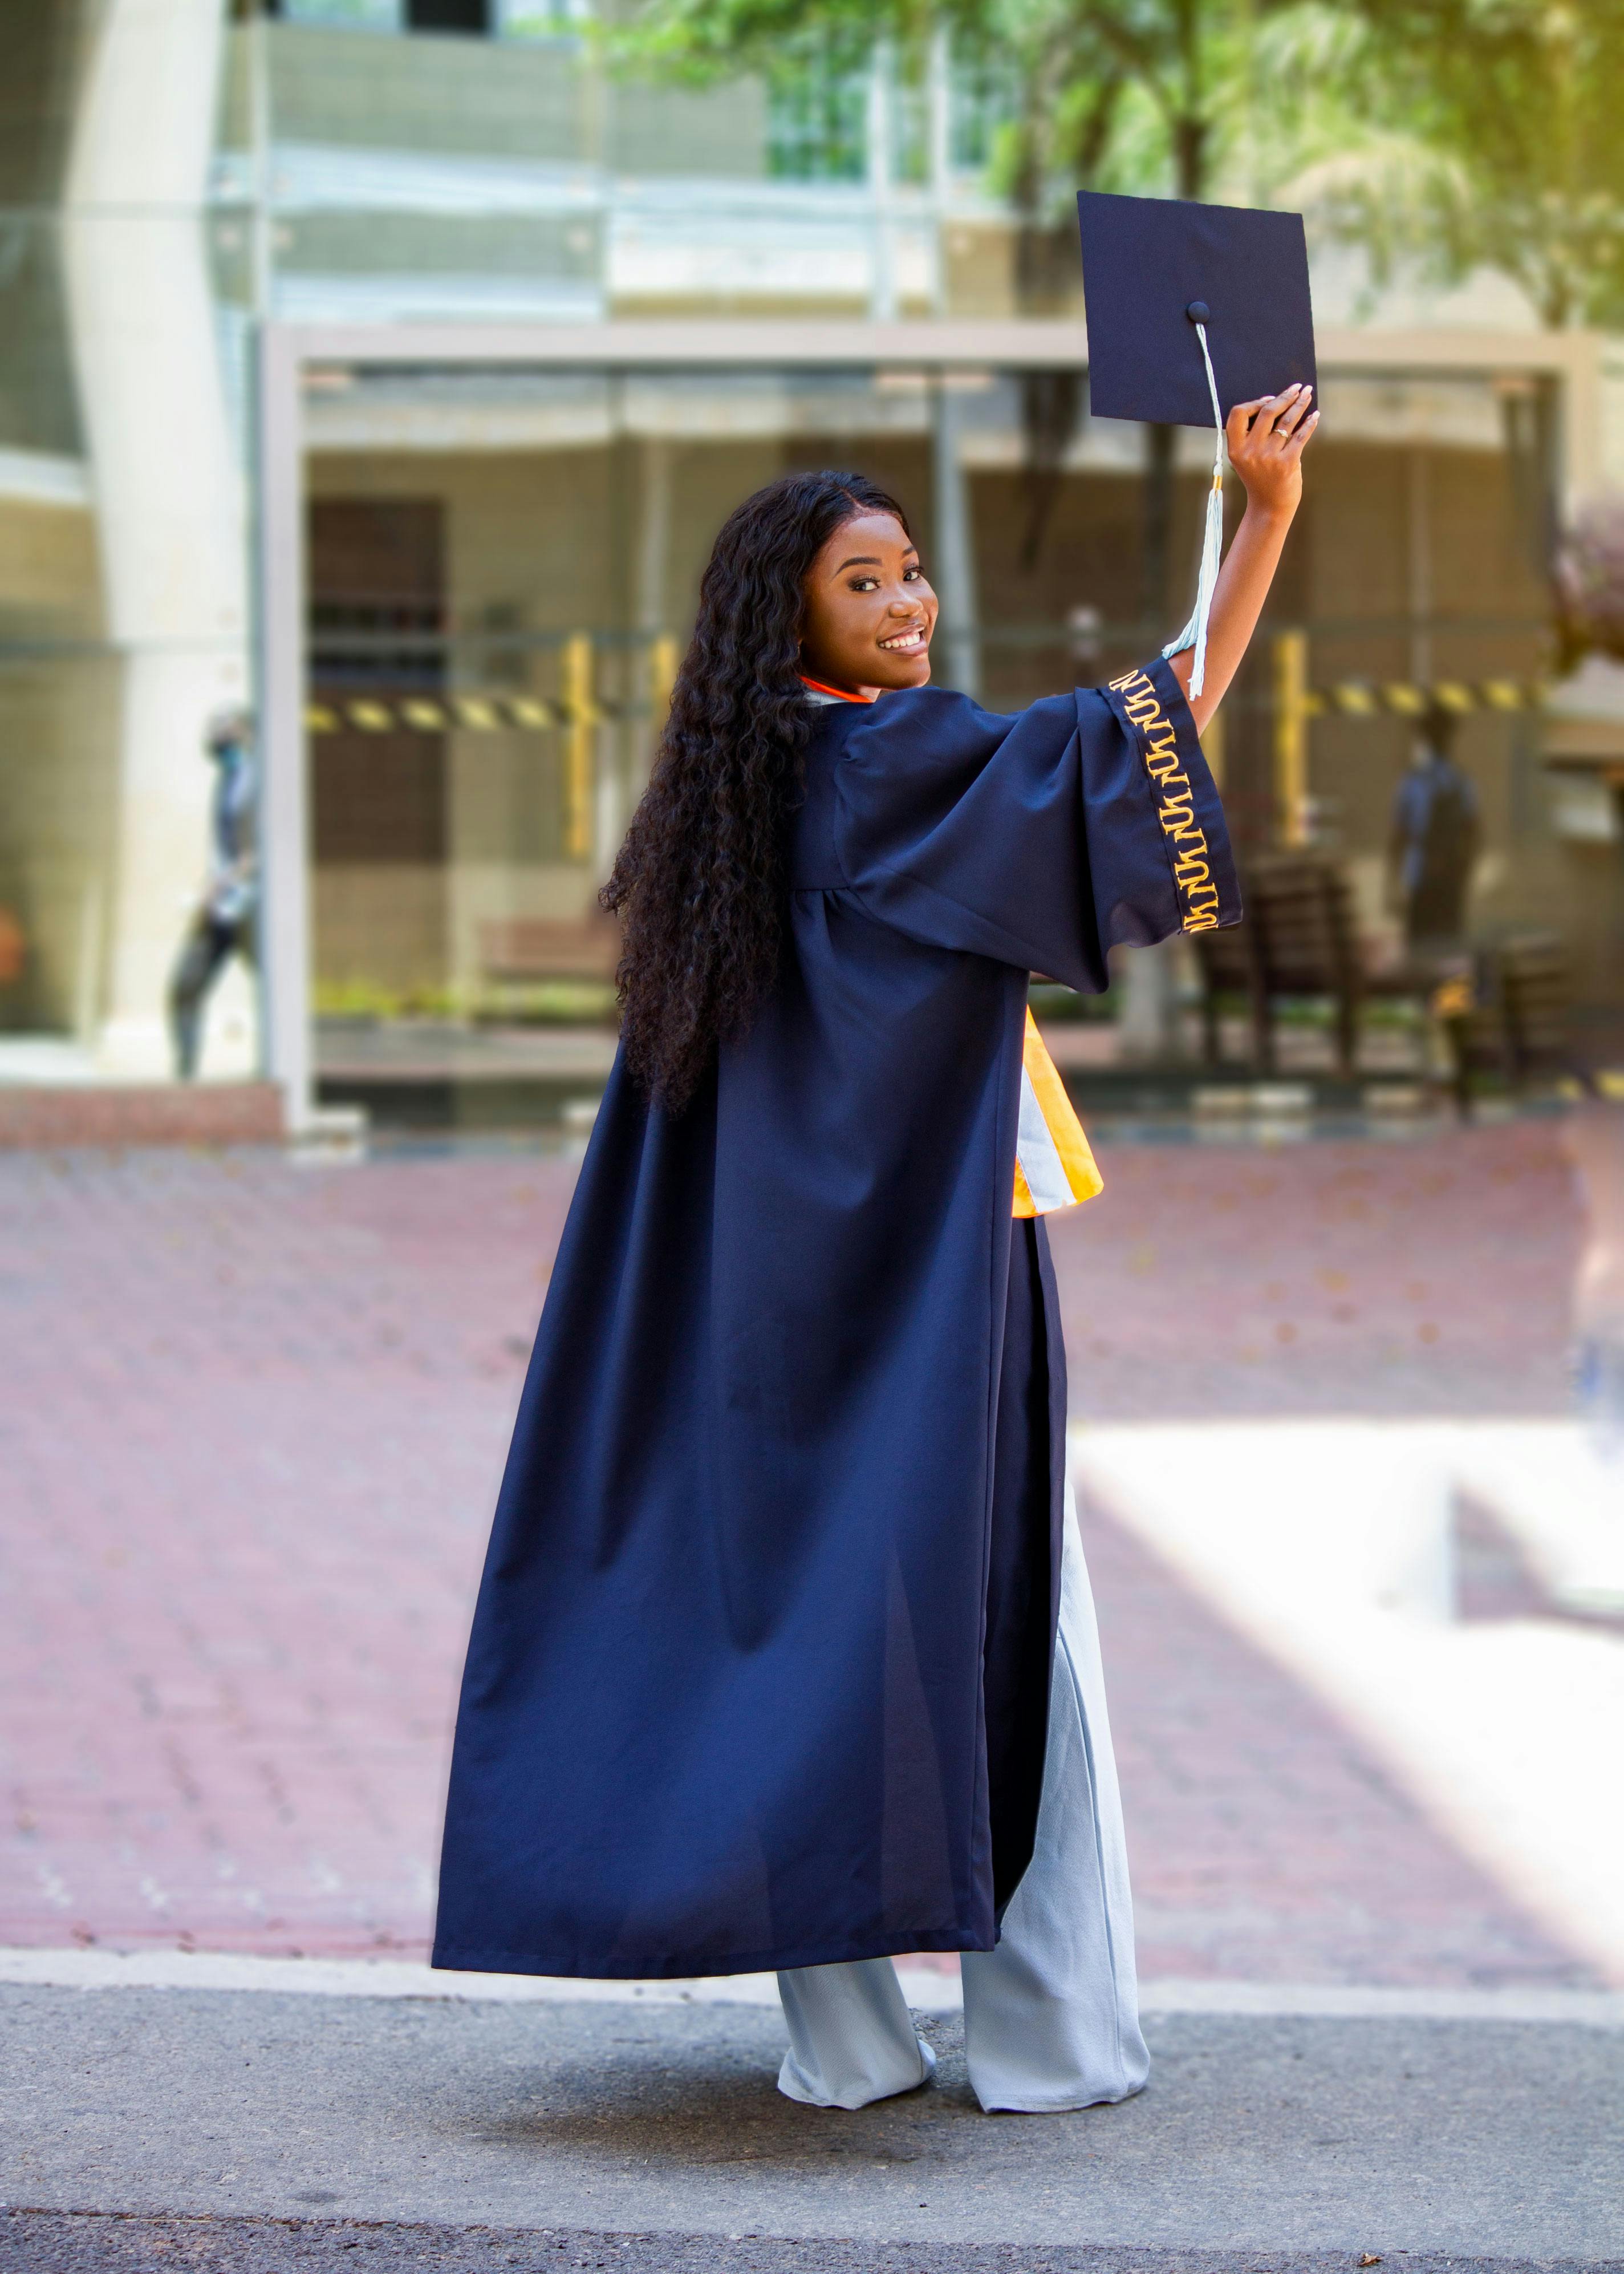 Cap & Gown | For Students | Commencement | DePaul University, Chicago